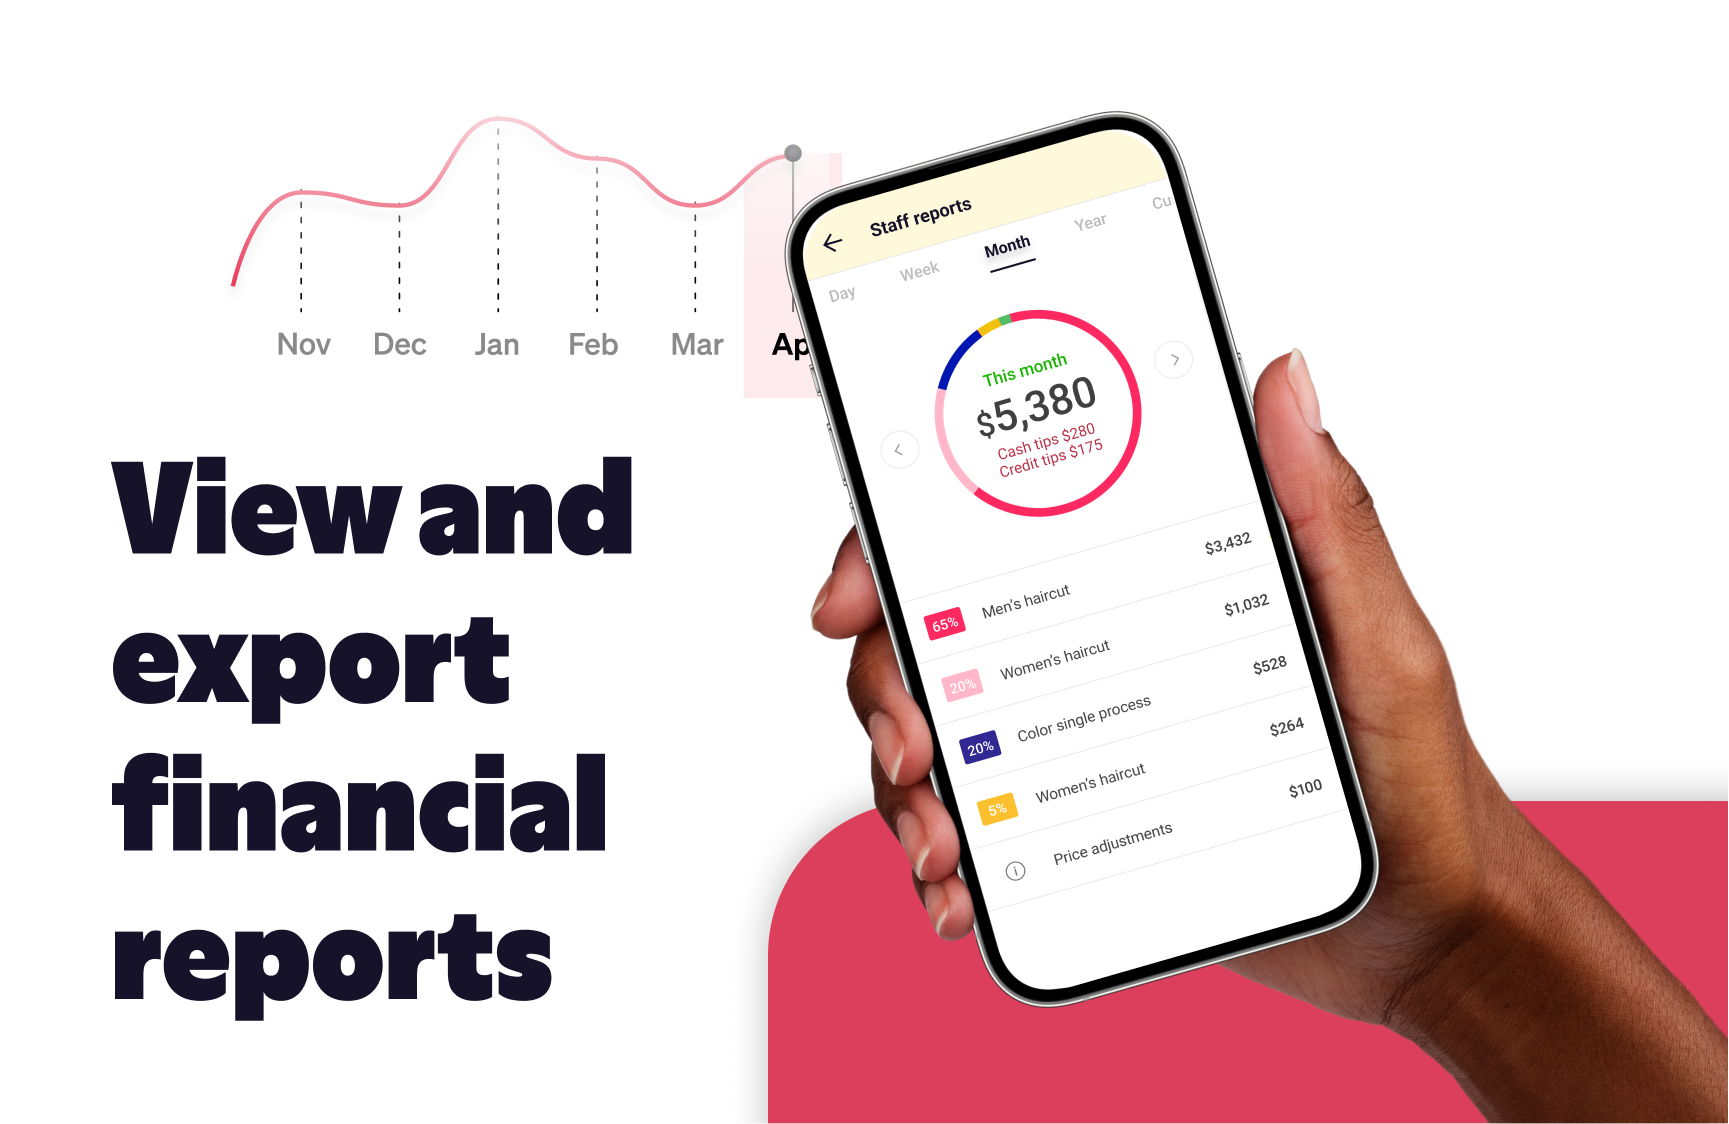 Goldie Software - Financial reports based on appointments and services. Better understand how your business is doing. See your daily, weekly or monthly or yearly income reports with a single tap, and see what are you best selling services and your best clients.